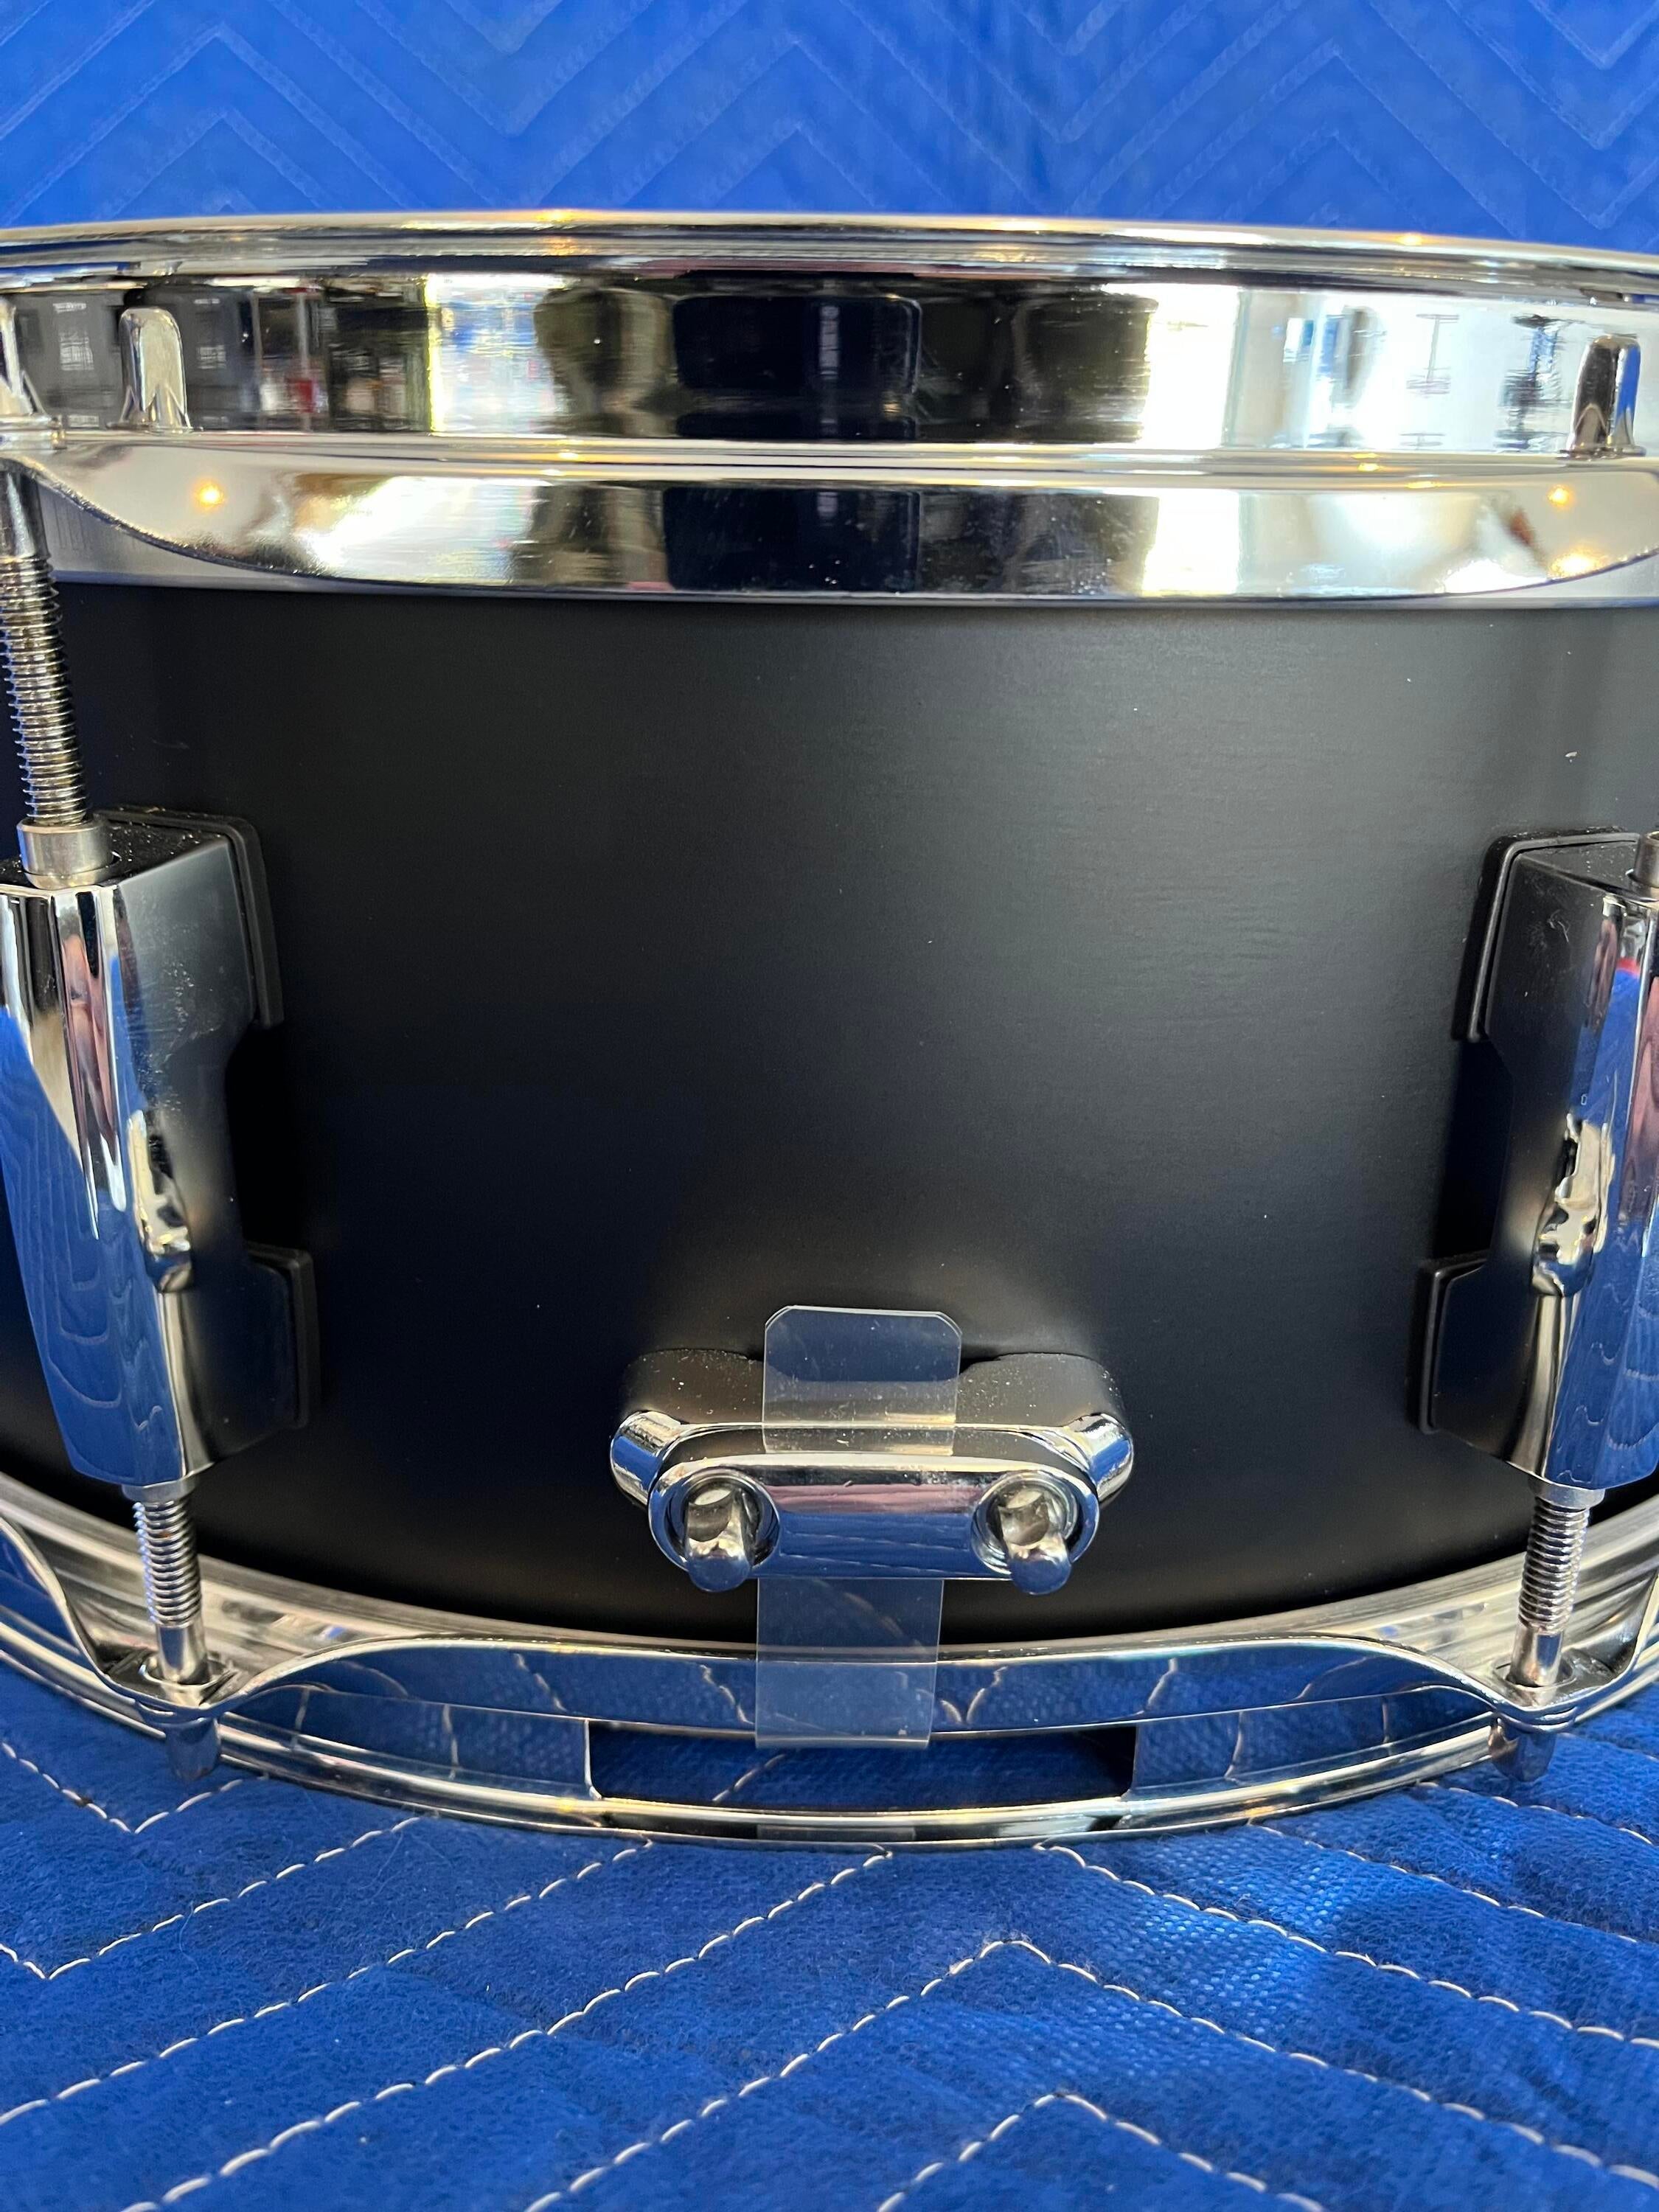 CANOPUS Birch Snare Drum 4x14 Royal LQ-kimarchiehealthcare.co.uk